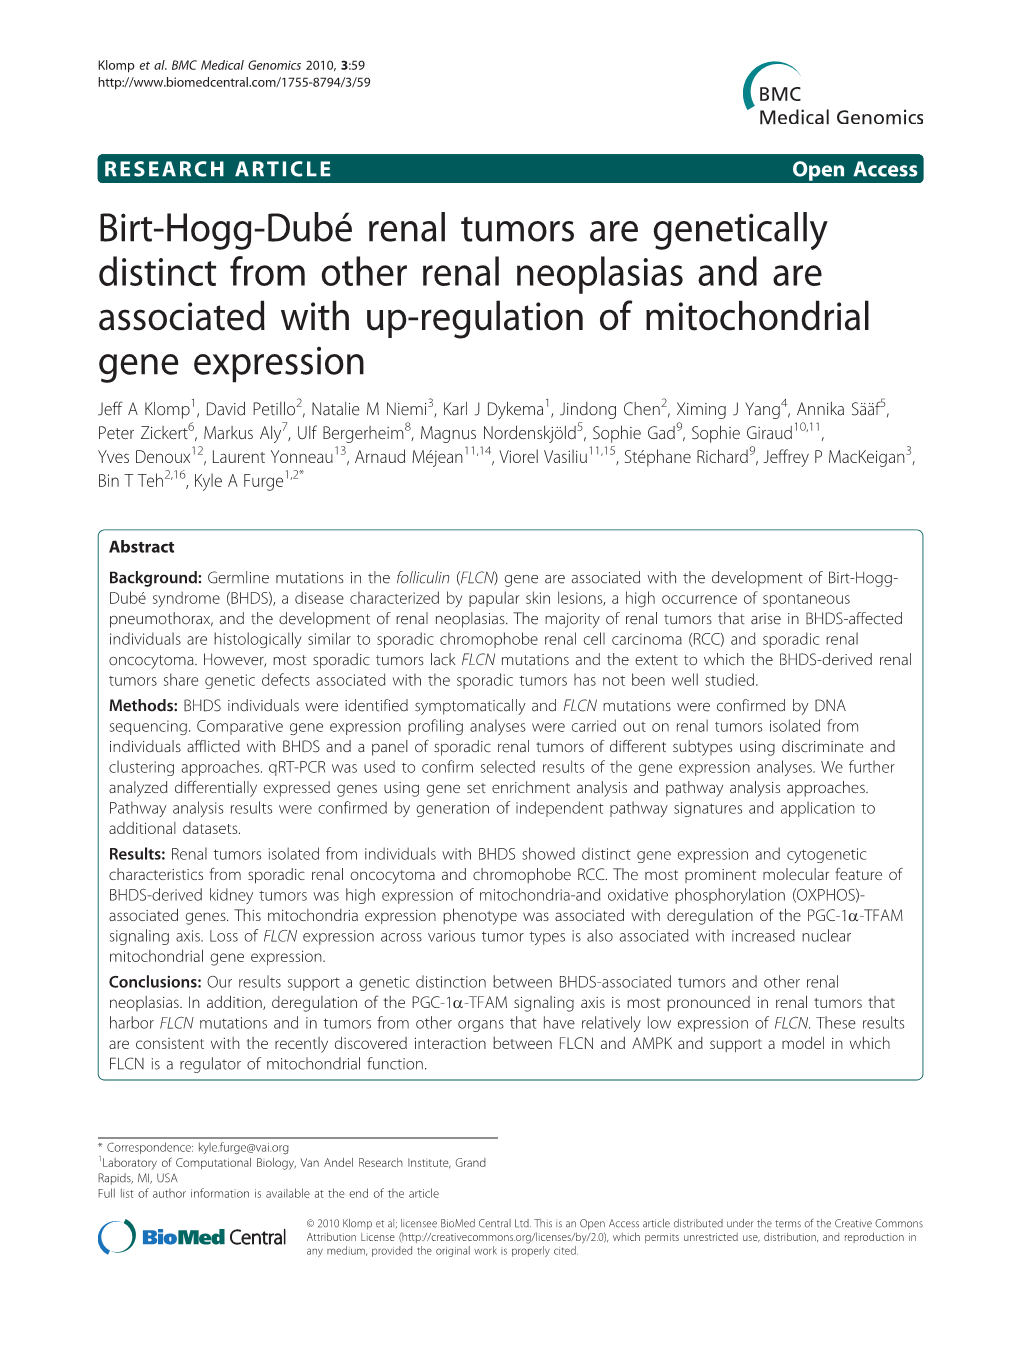 Birt-Hogg-Dubé Renal Tumors Are Genetically Distinct from Other Renal